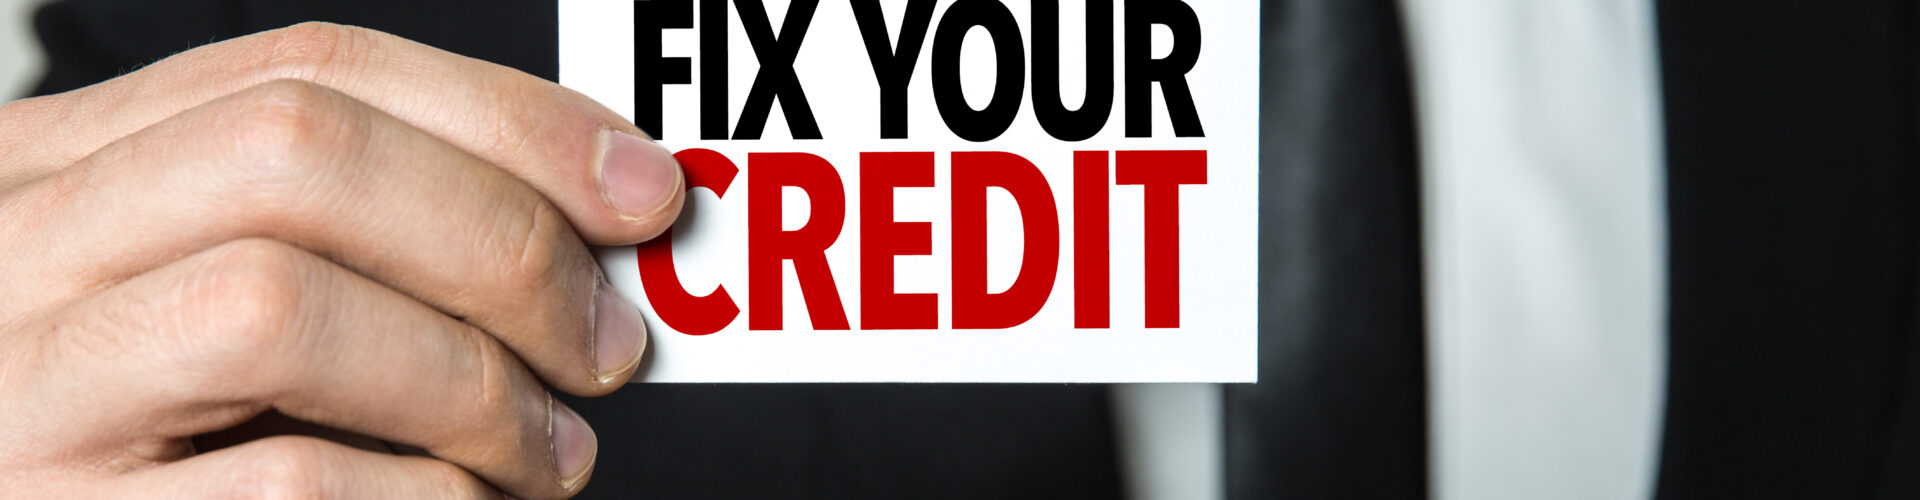 Improve Your Credit Score: Start Today!